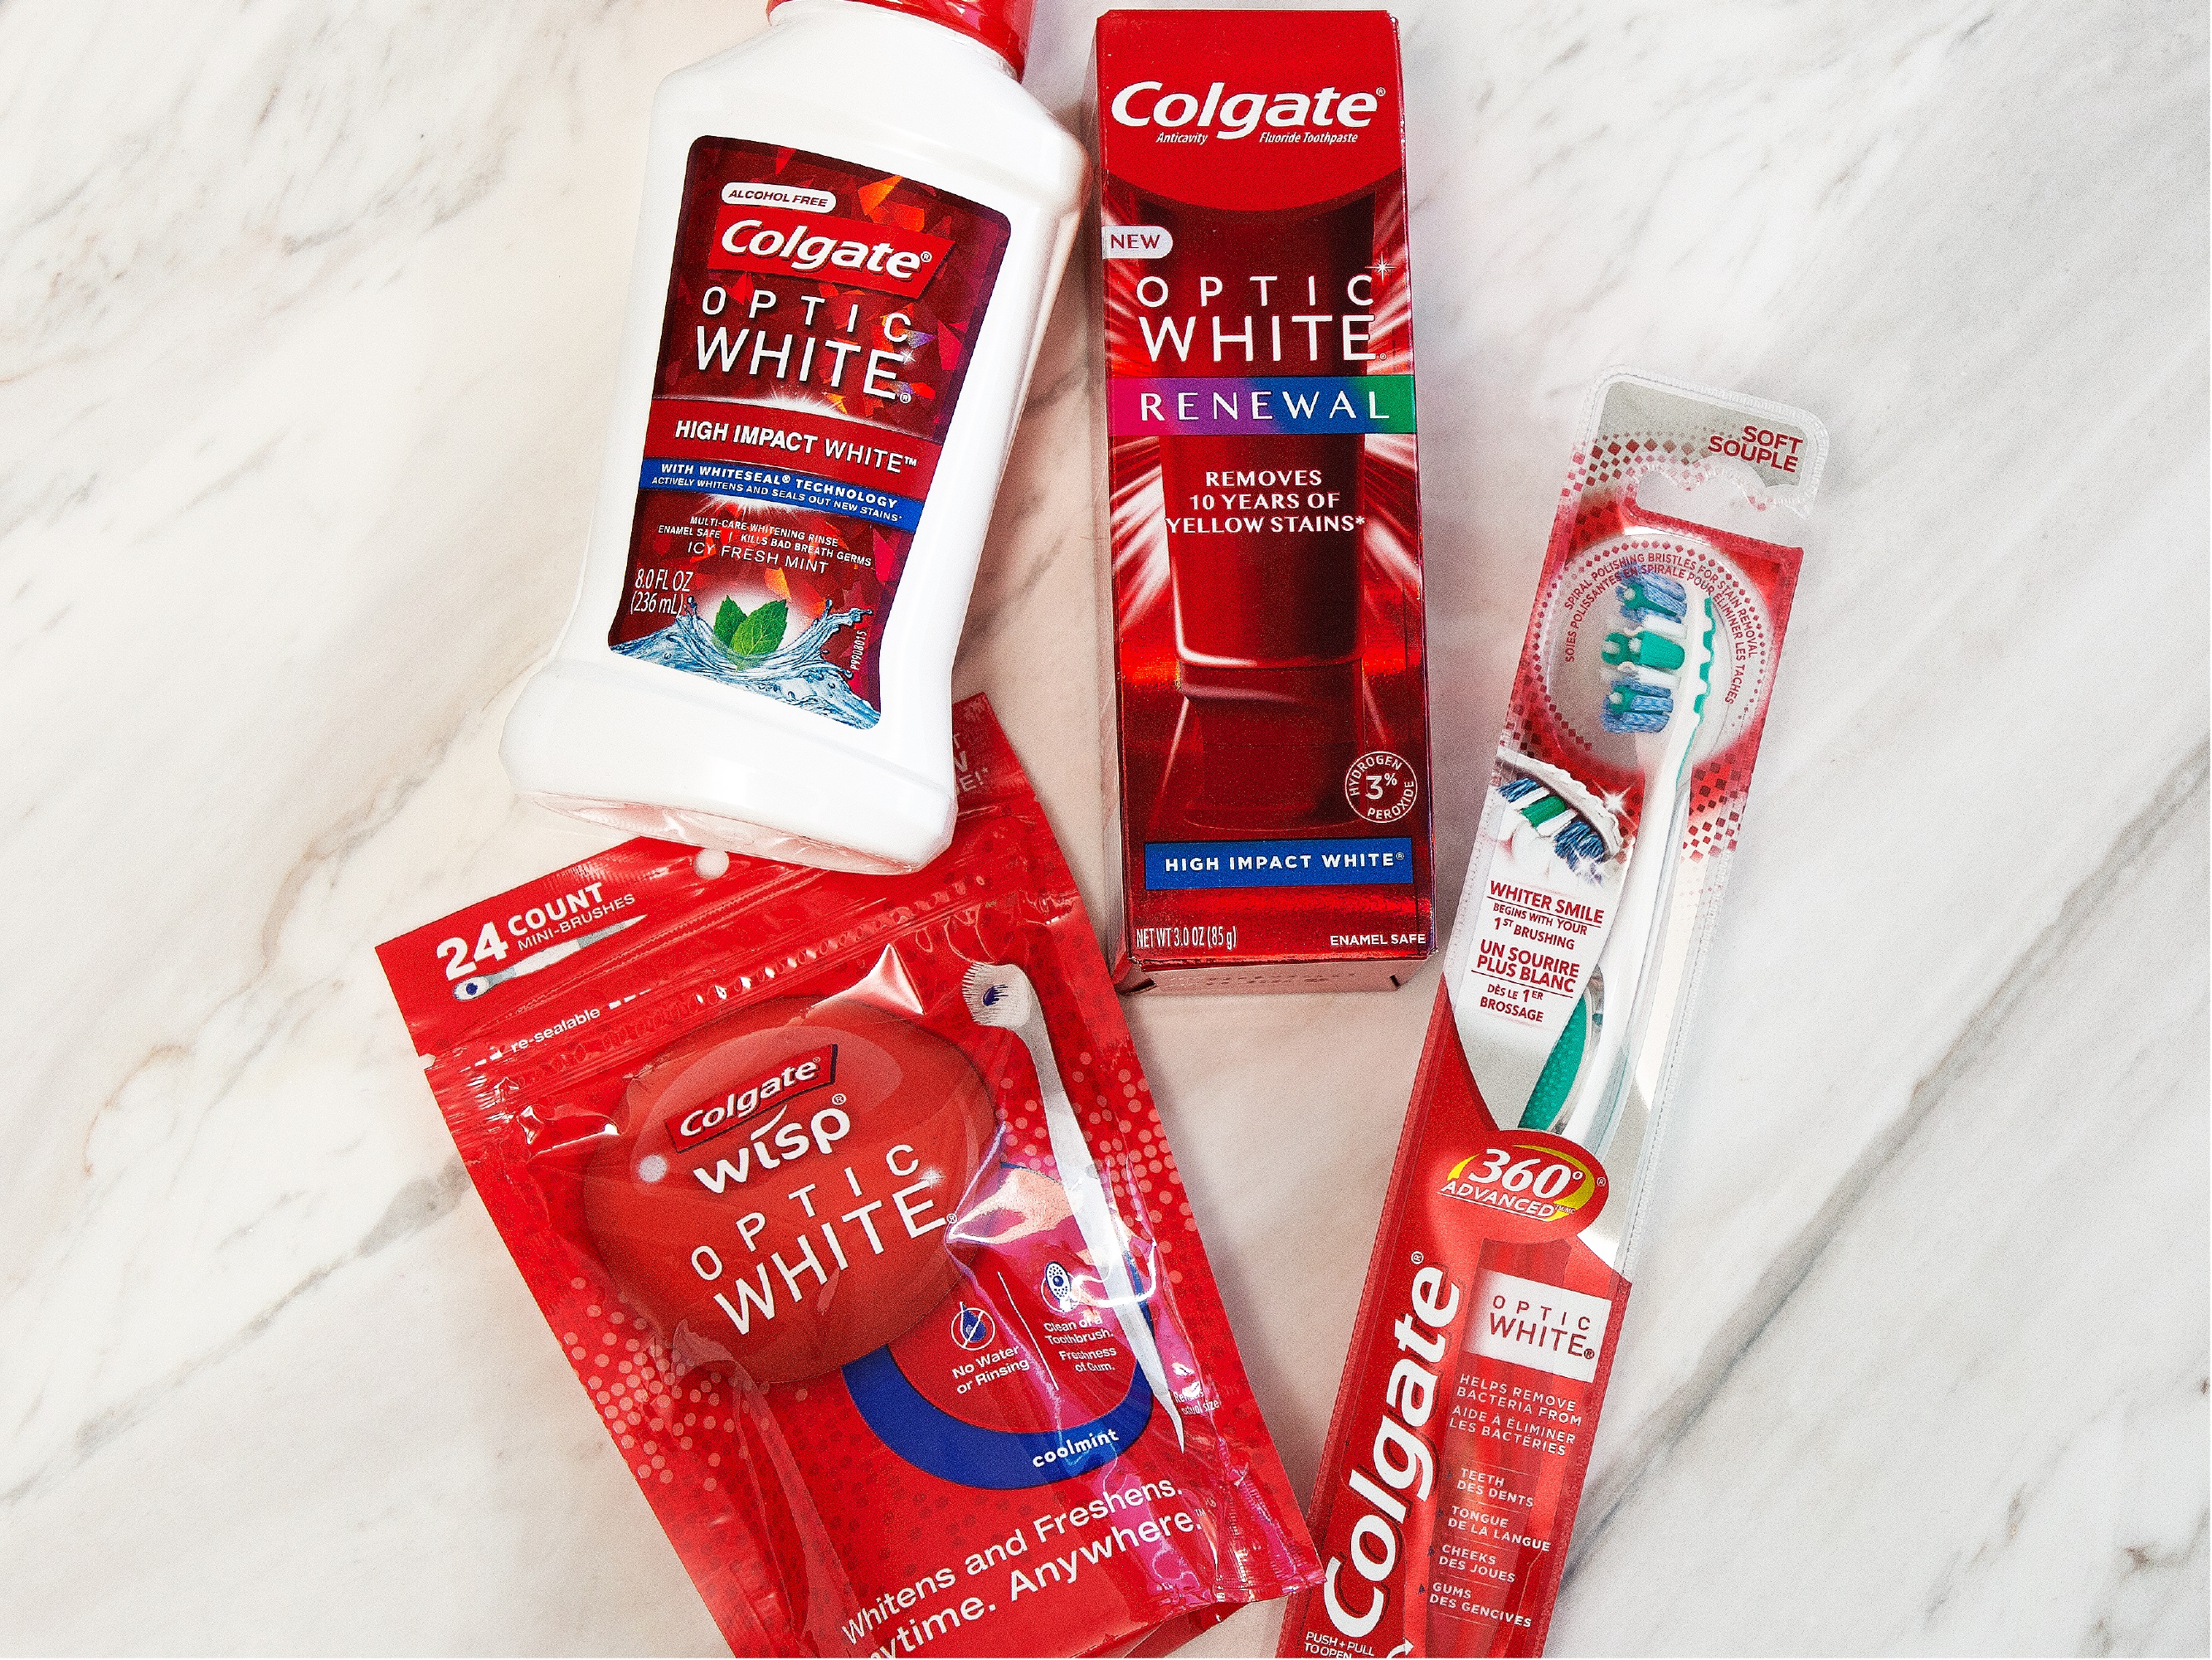 With unprecedented whitening power, NEW Colgate® Optic White® Renewal toothpaste removes 10 years of yellow stains when brushing twice daily for 4 weeks.